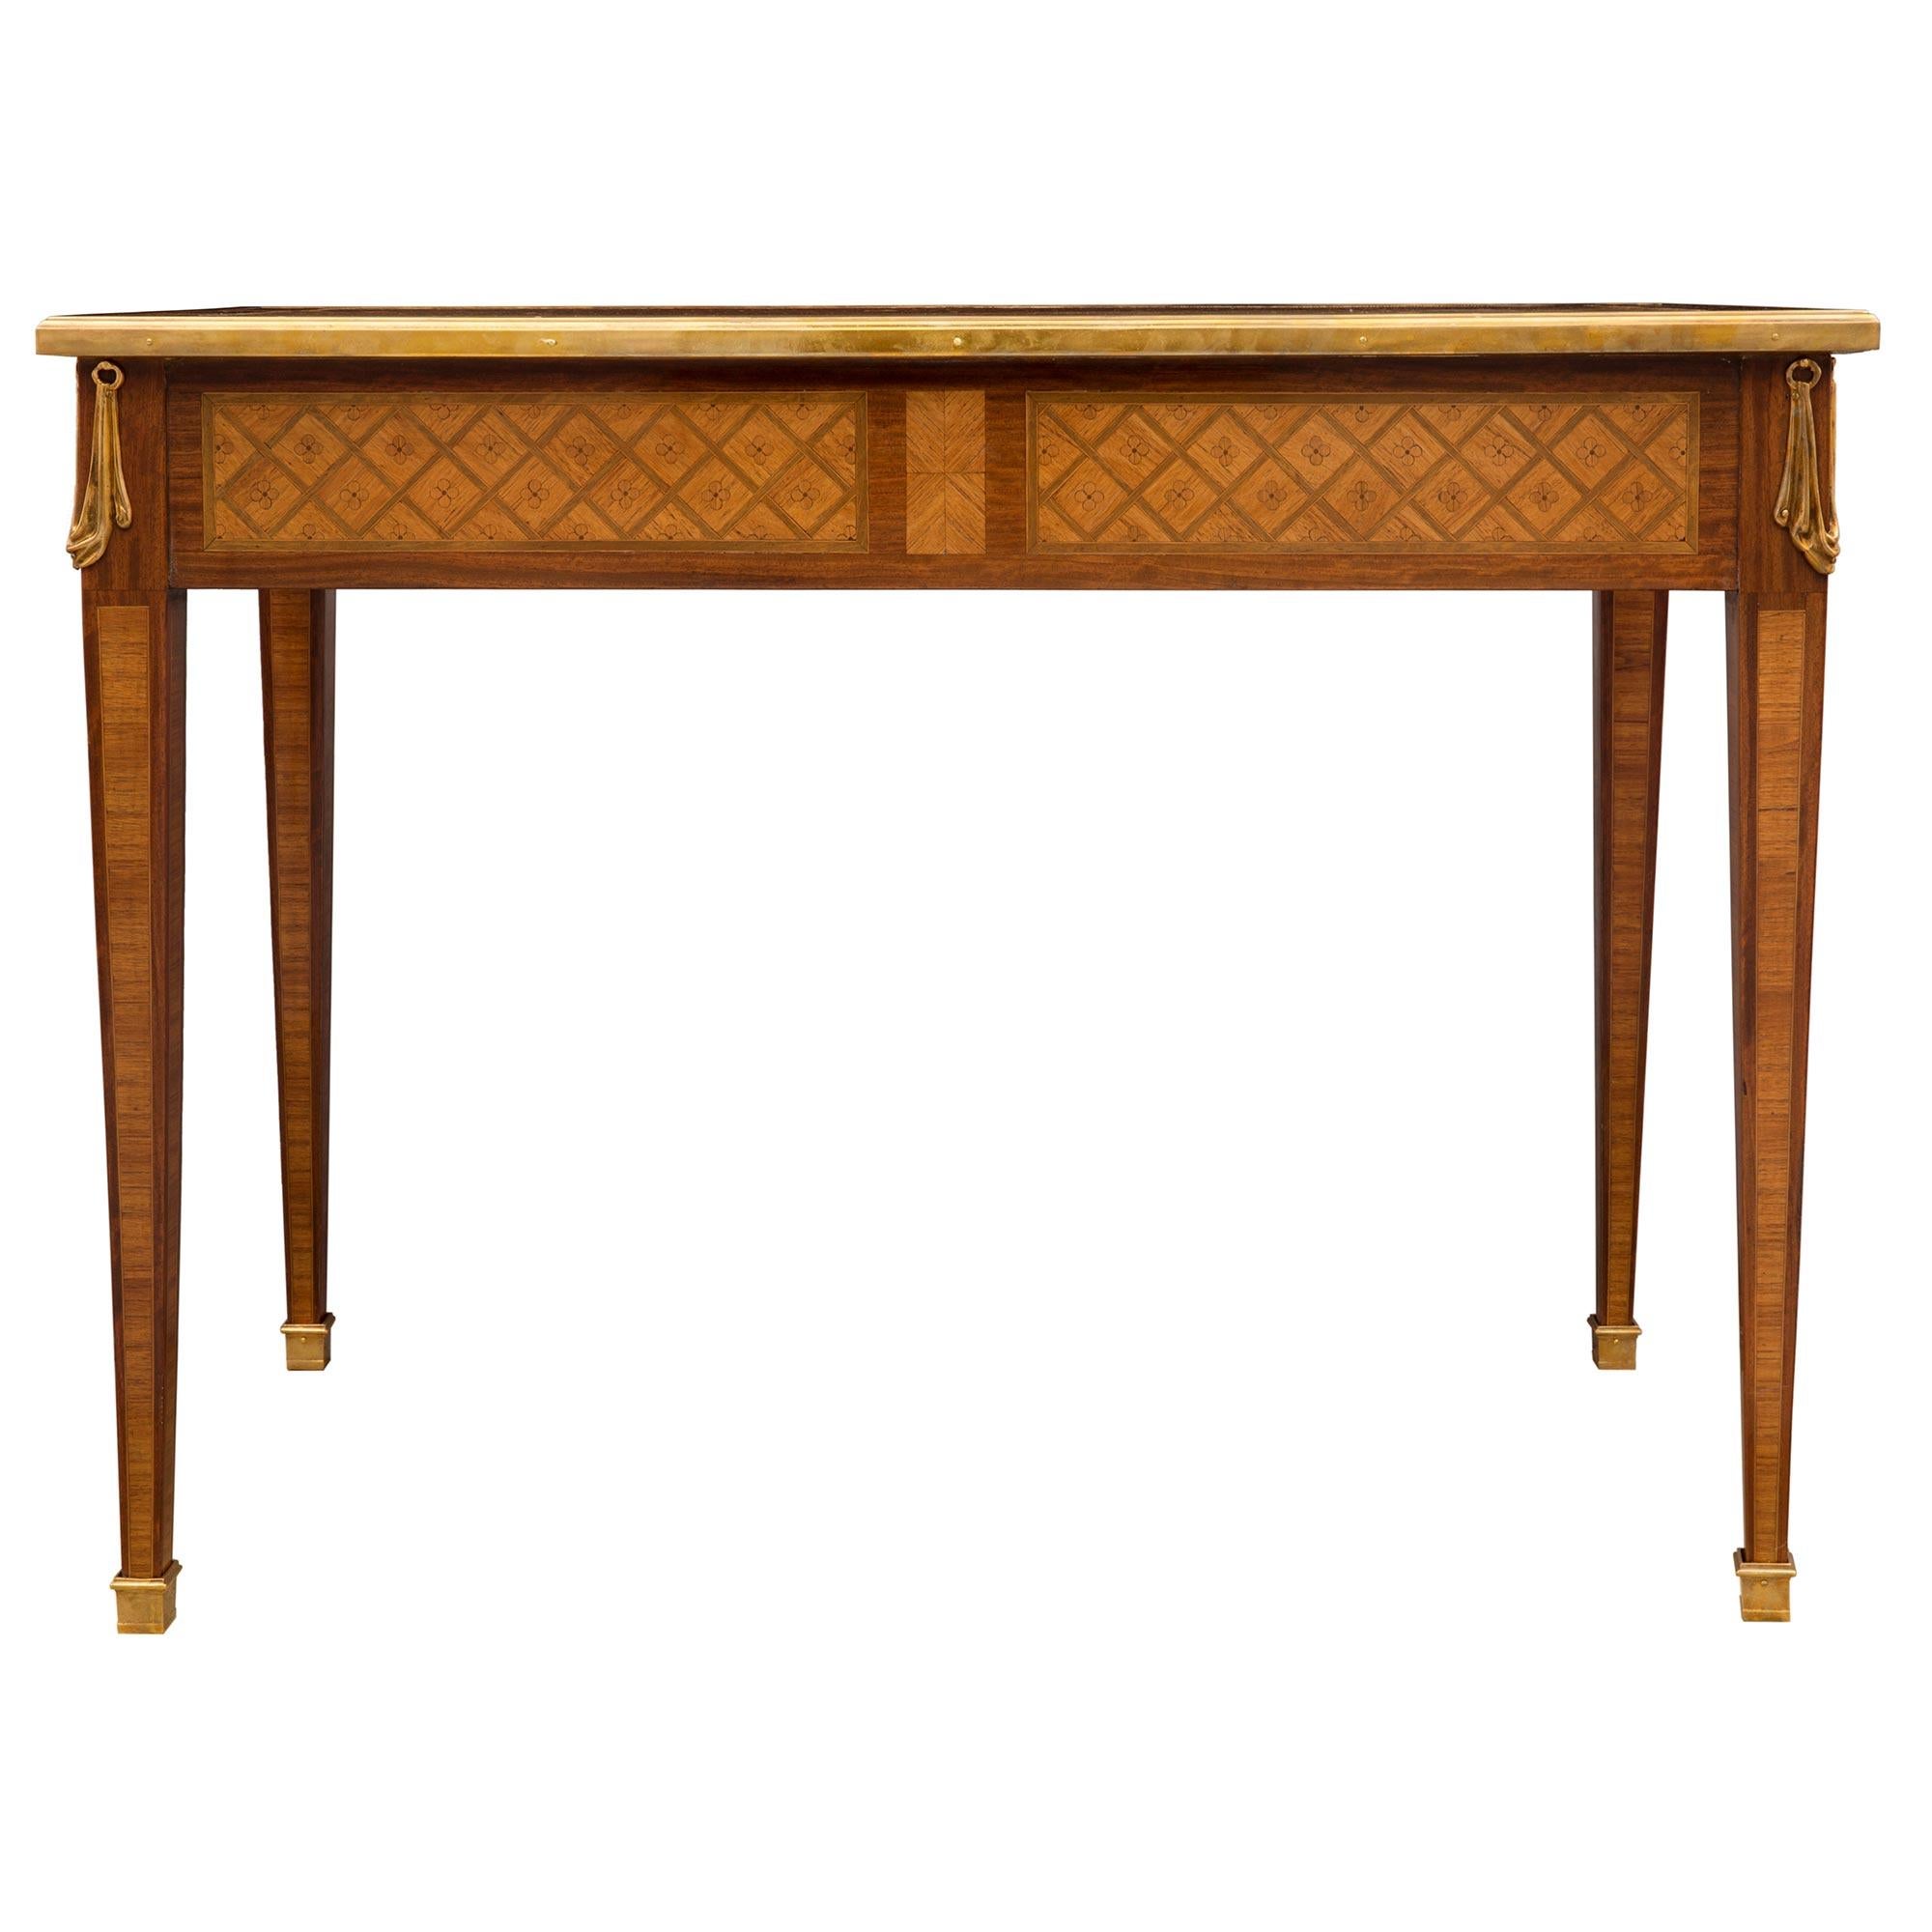 French Mid-19th Century Louis XVI Style Tulipwood, Kingwood and Charmwood Desk For Sale 3